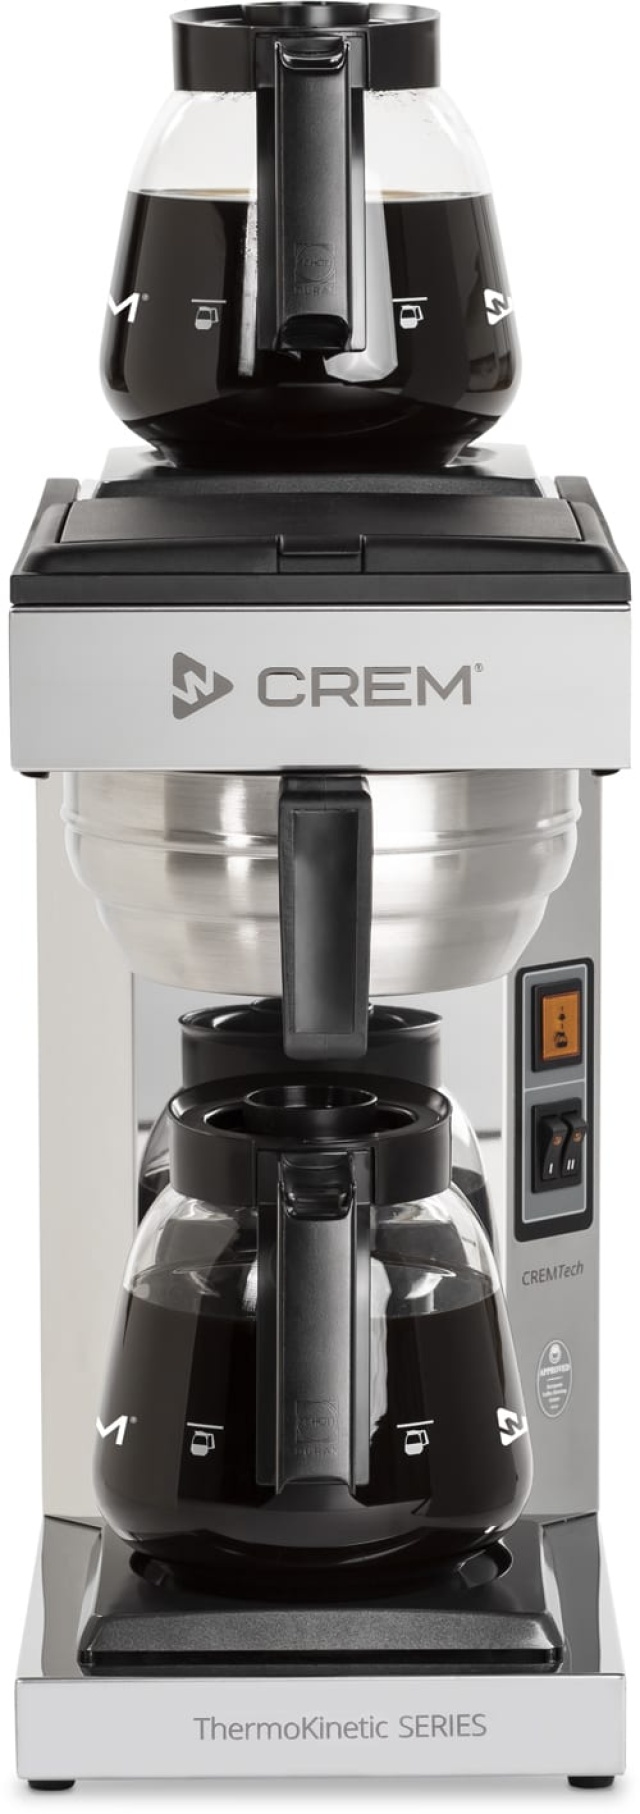 ThermoKinetic M2, coffee maker - Crem